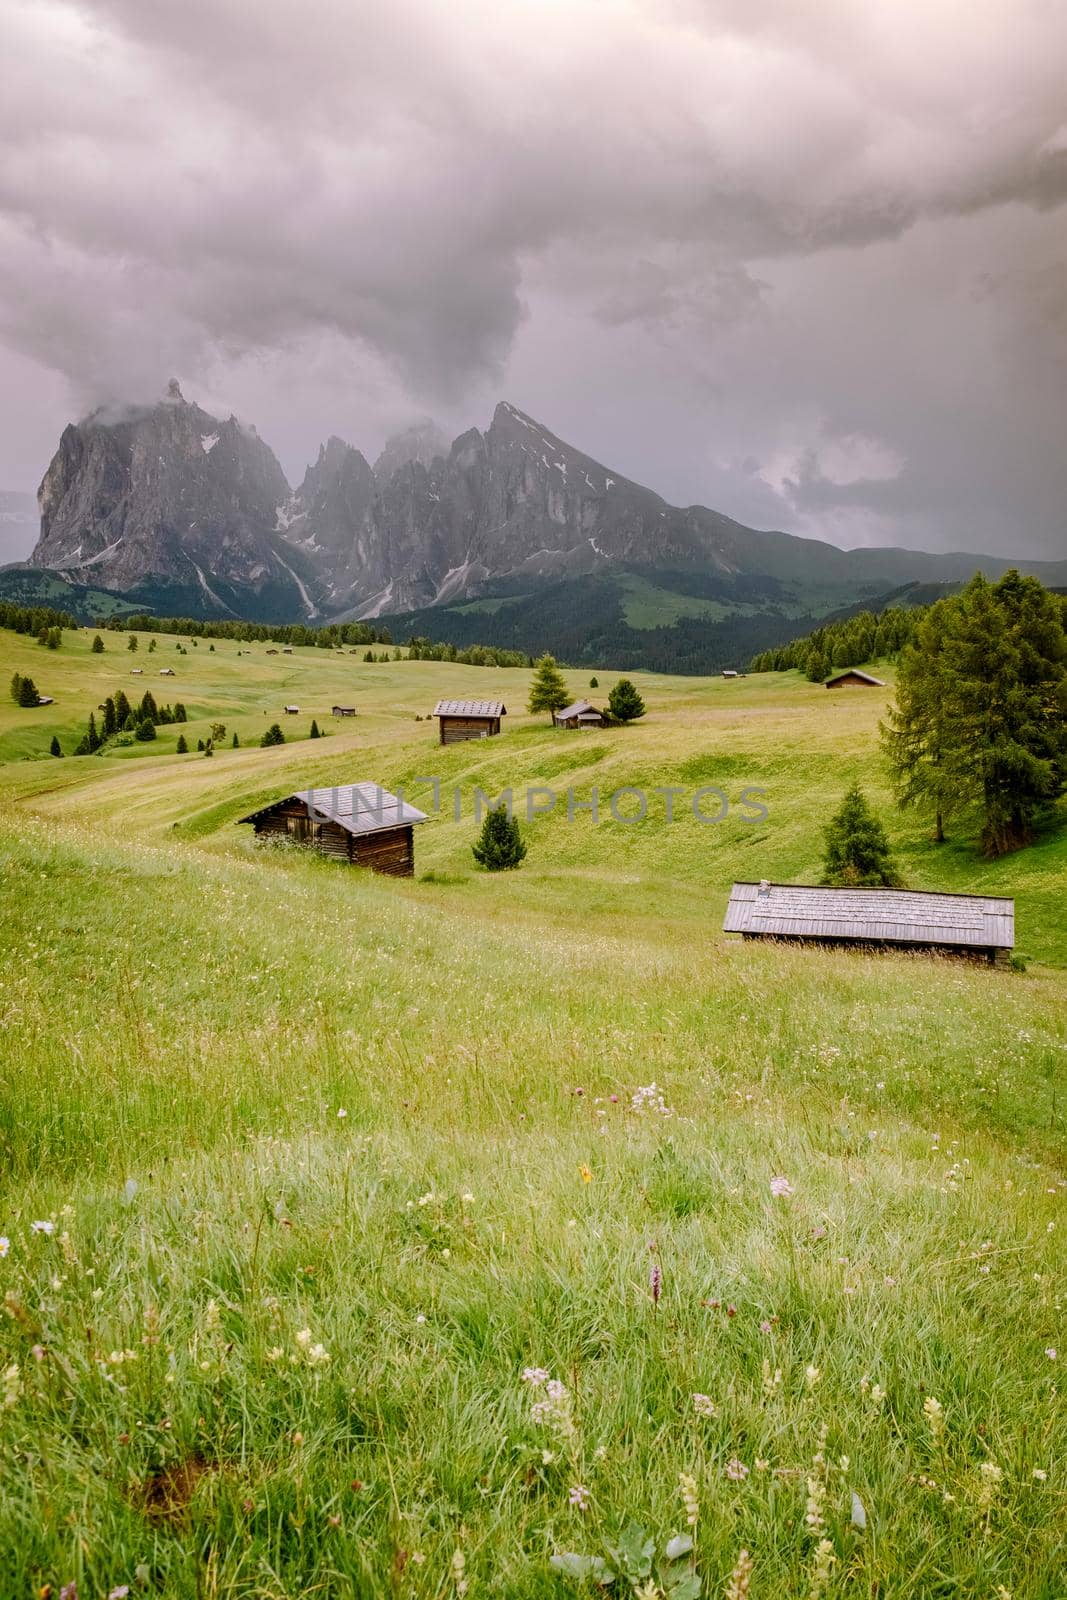 Alpe di Siusi - Seiser Alm with Sassolungo - Langkofel mountain group in background at sunset. Yellow spring flowers and wooden chalets in Dolomites, Trentino Alto Adige, South Tyrol, Italy, Europe. Summer weather with dark clouds rain